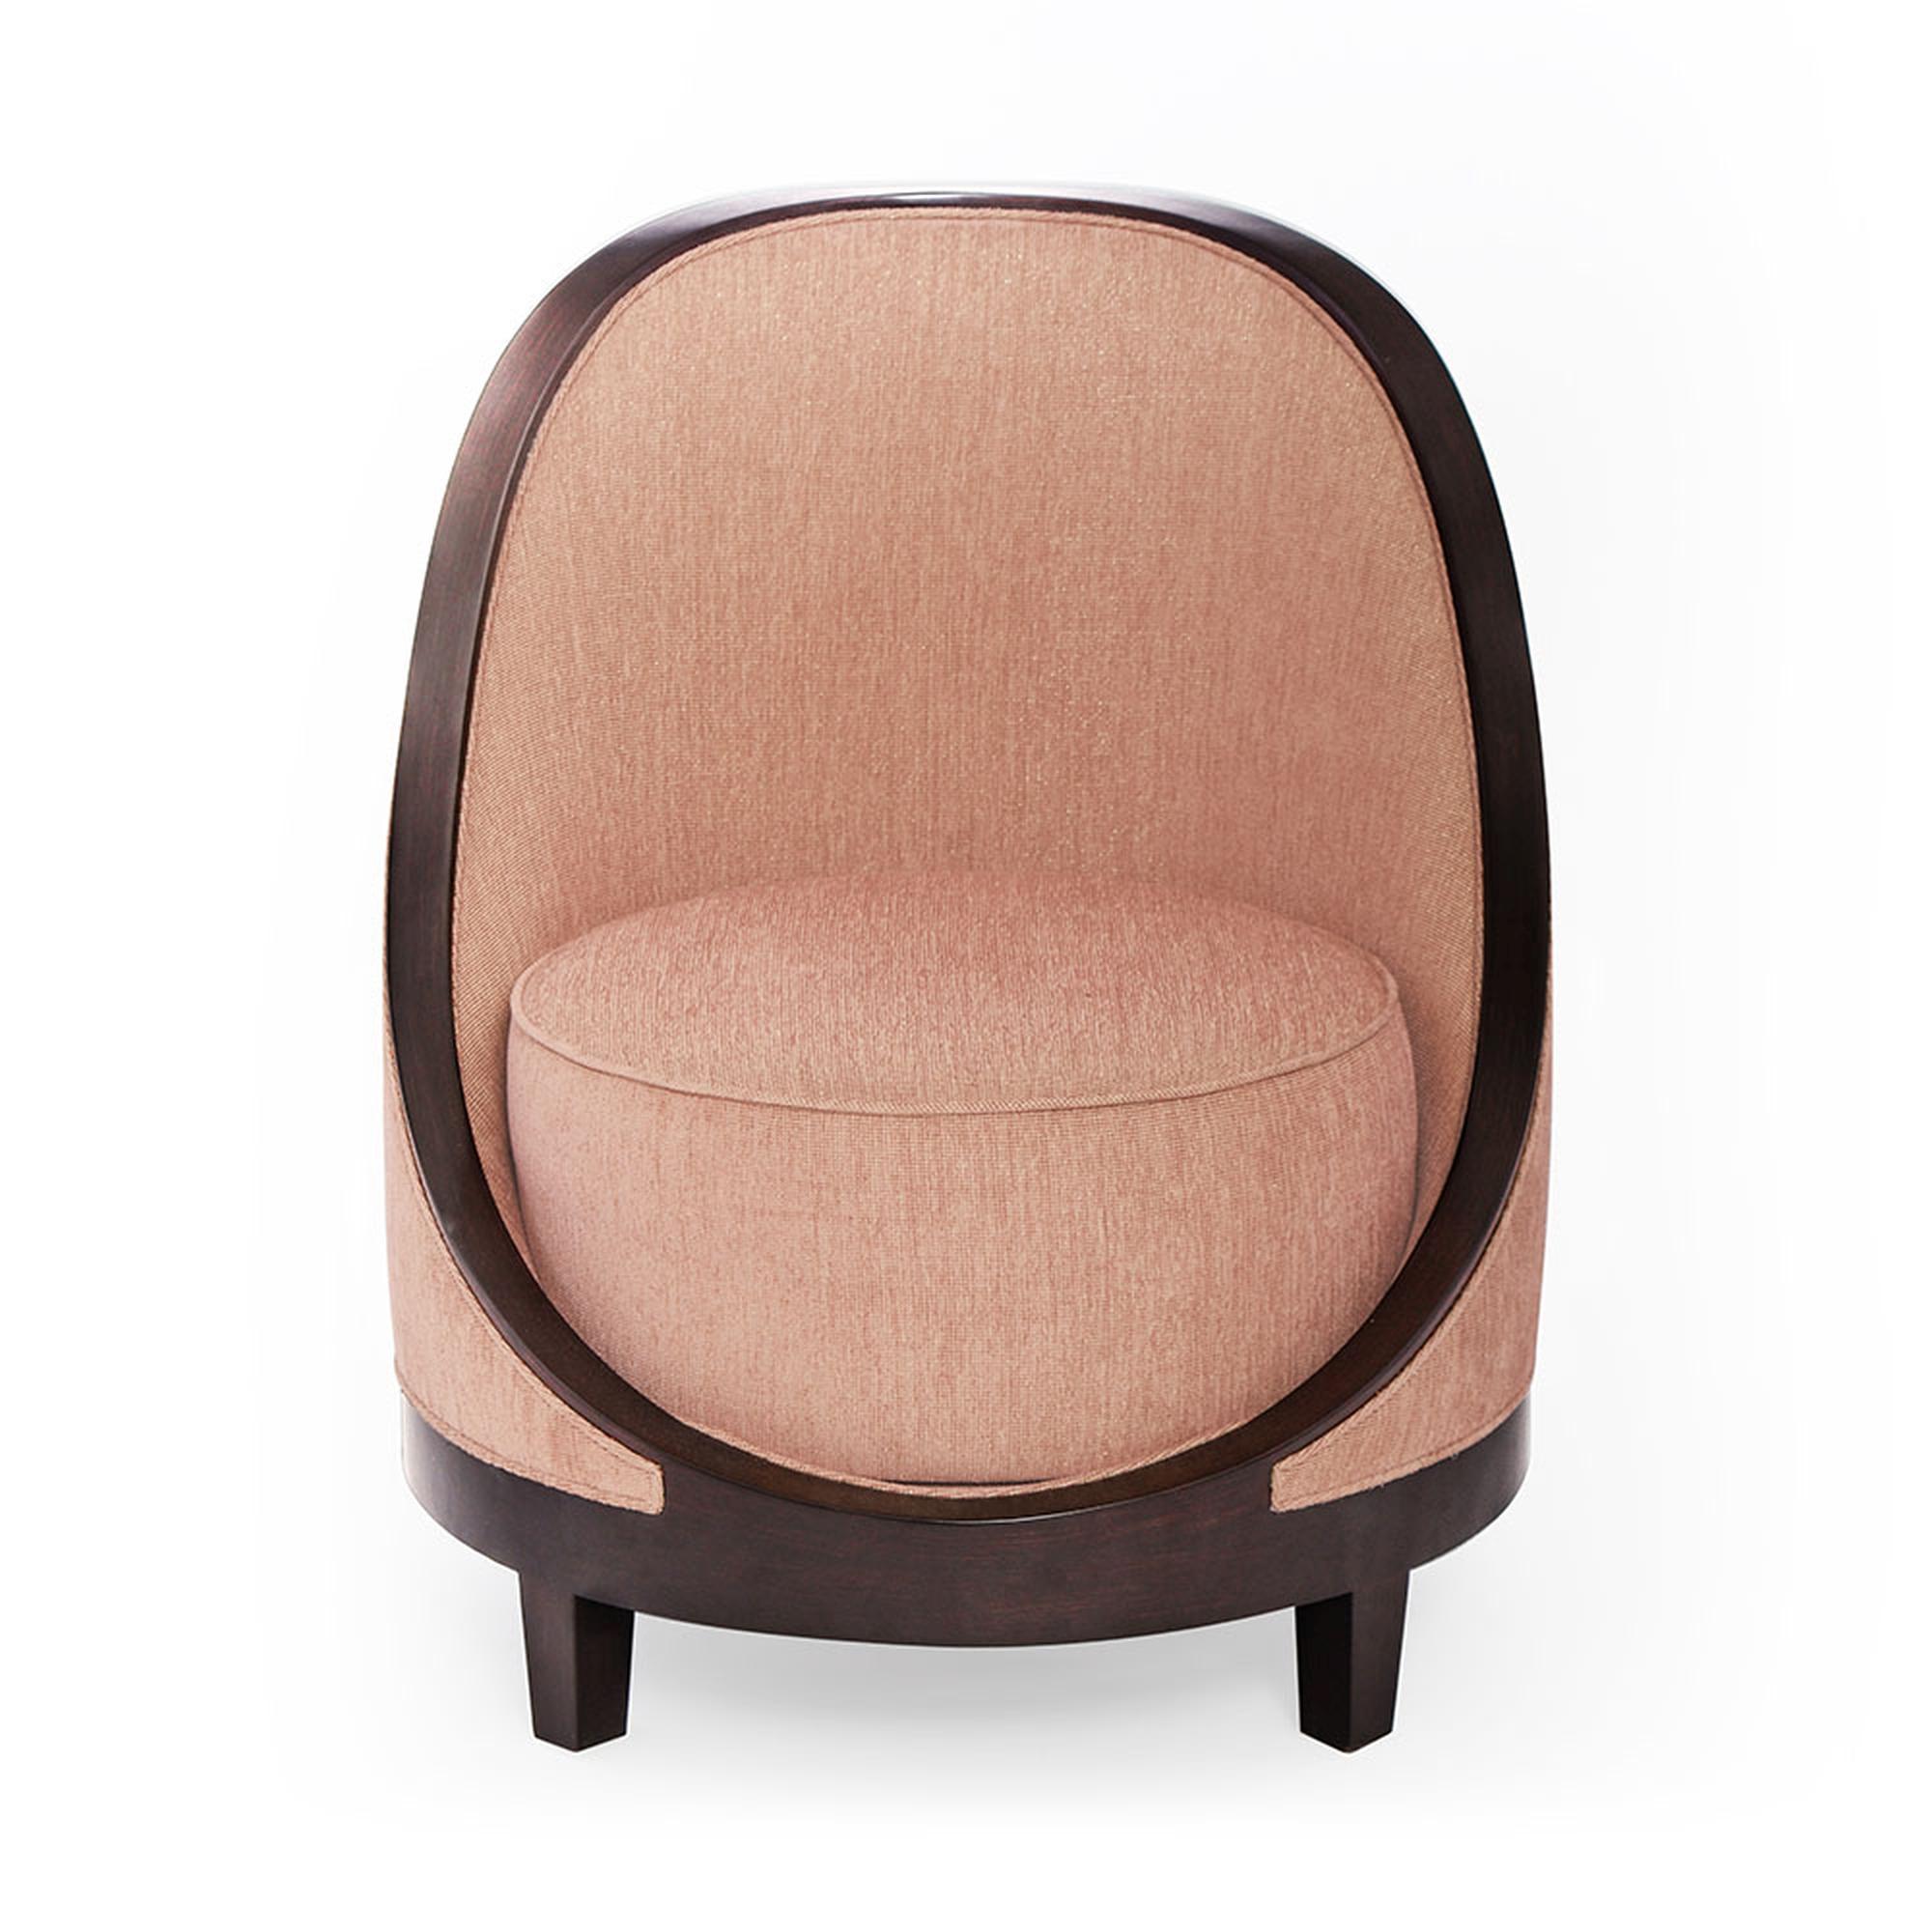 A charismatic piece, the Marmont accent chair I is an updated take on a French Art Deco boudoir chair. With a curved back, and round silhouette, this charming seat is fully upholstered and supported by a matte nished wood that ows in stunning and